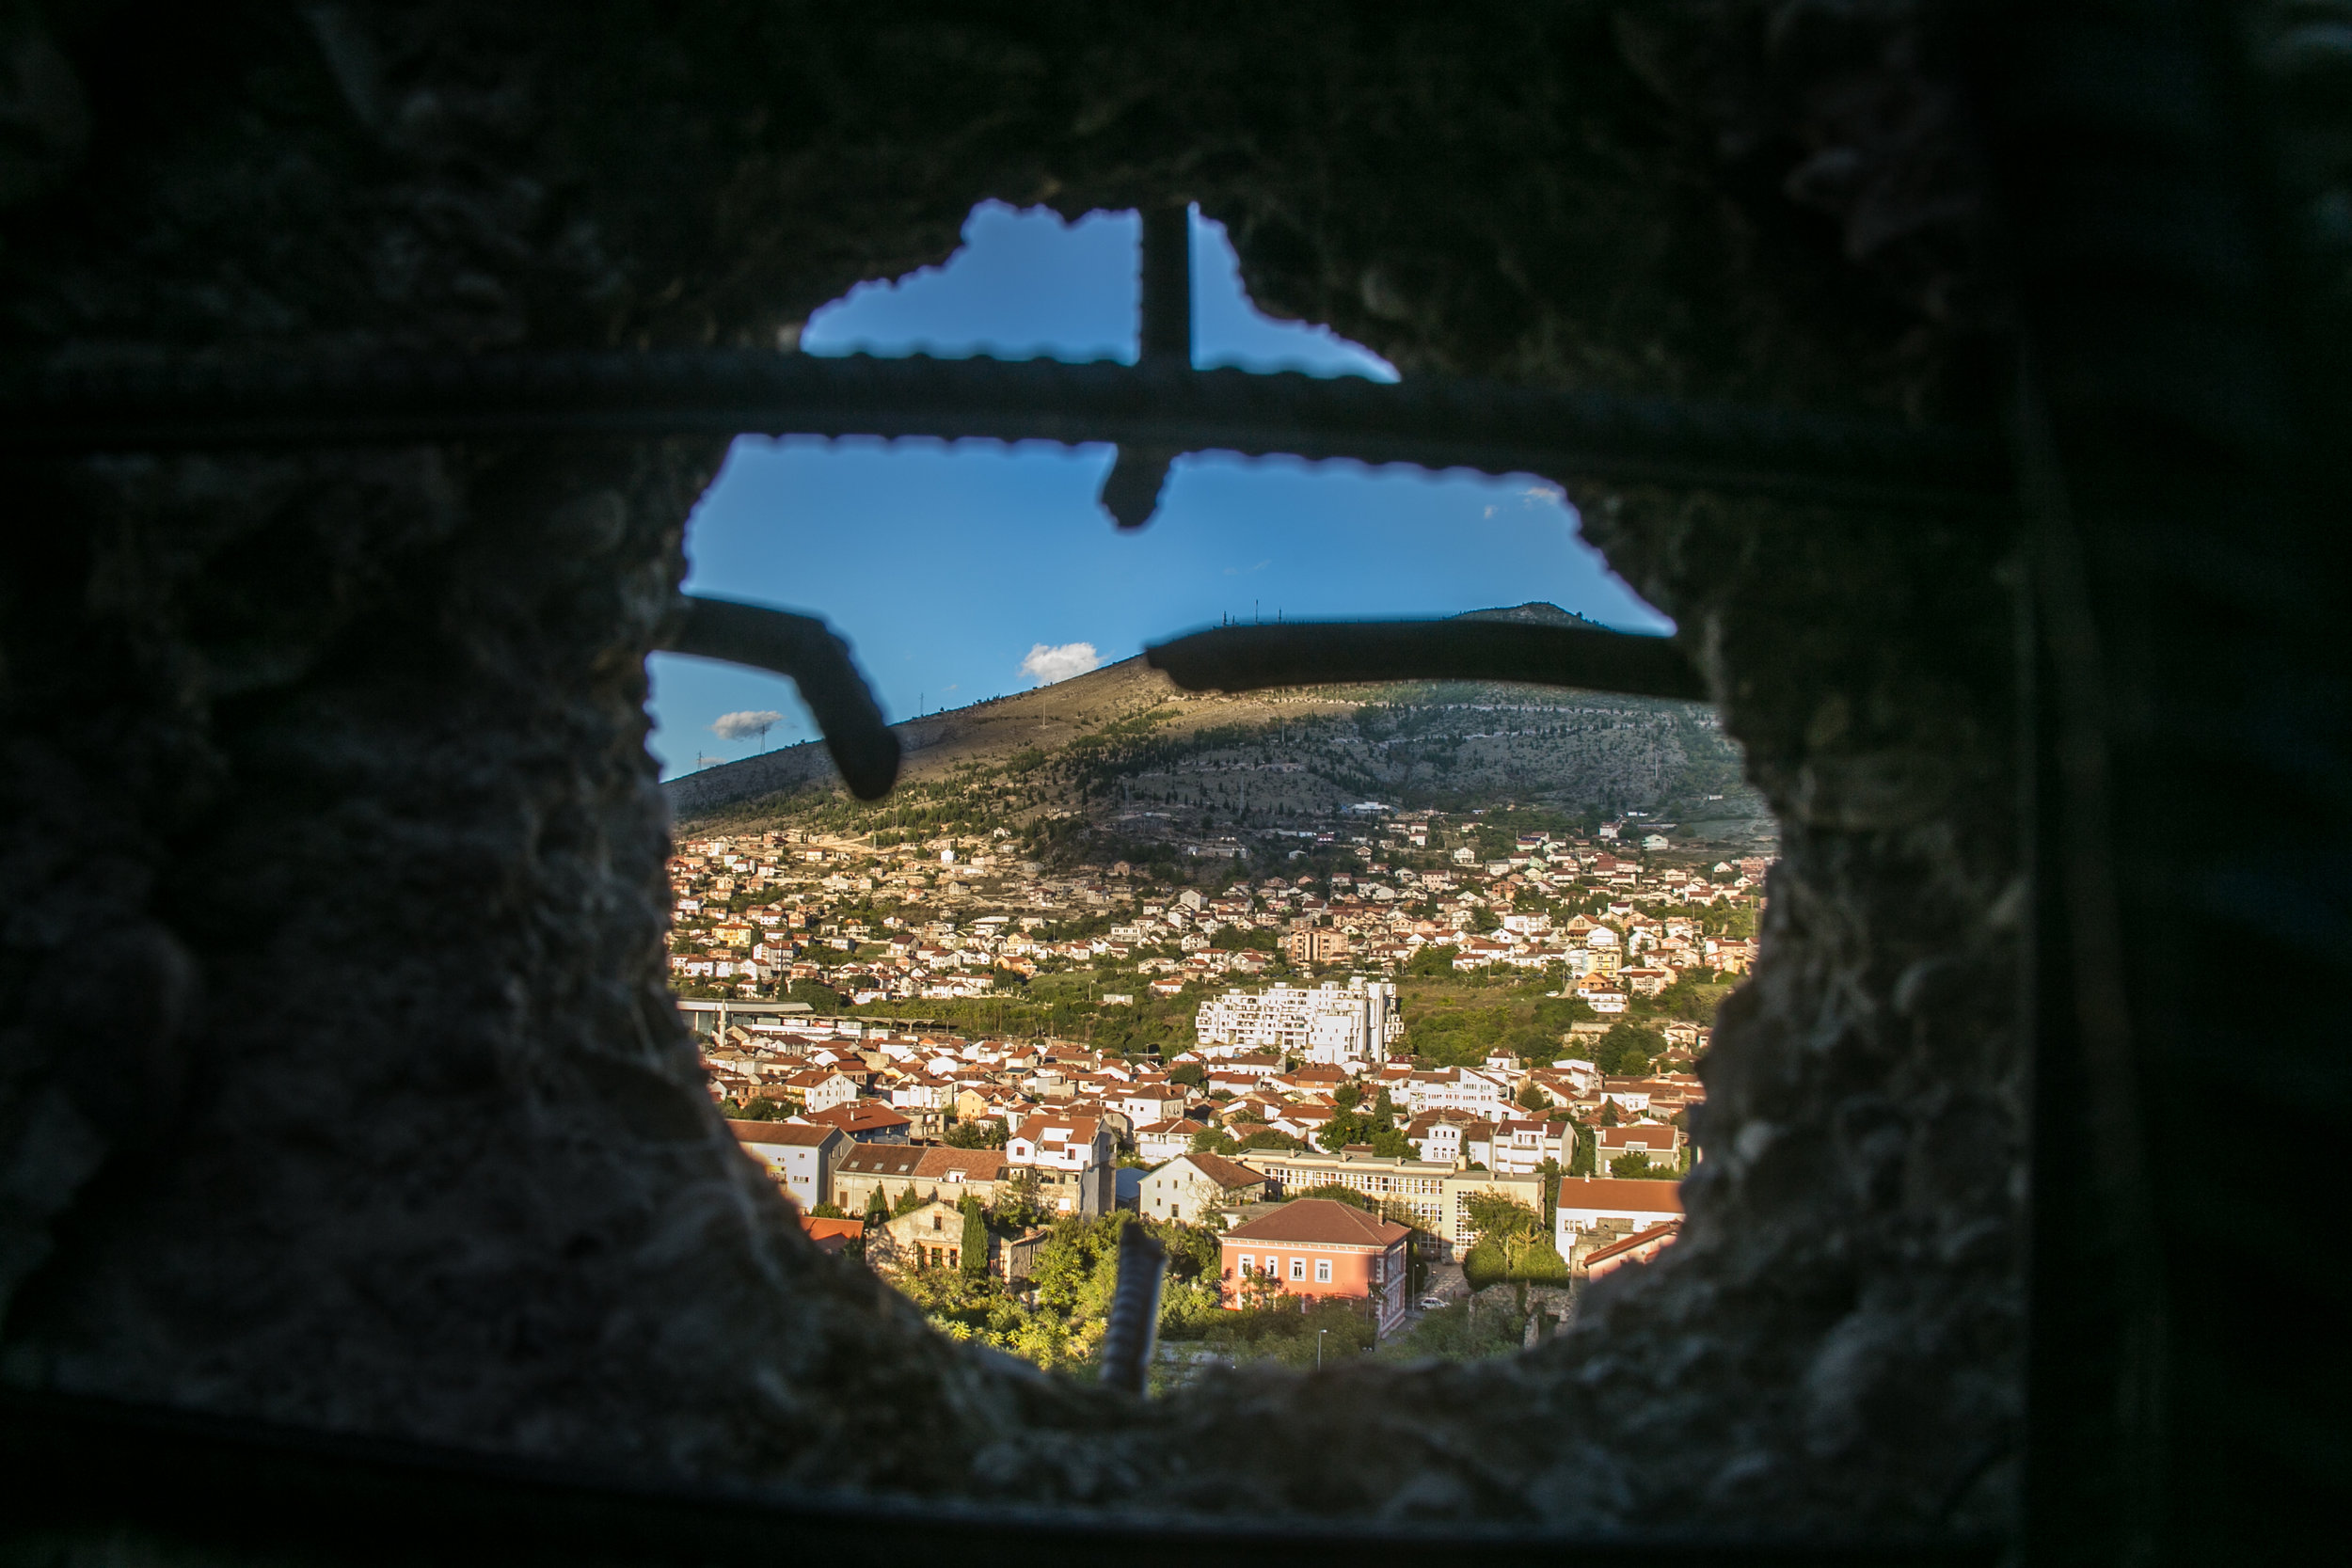  A sniper hole punched in the wall of an old bank building looks over the neighborhoods of Mostar, Bosnia. The bank was repurposed during the Bosnian War in an attempt to help defend the city from attacking Croatians.&nbsp; 